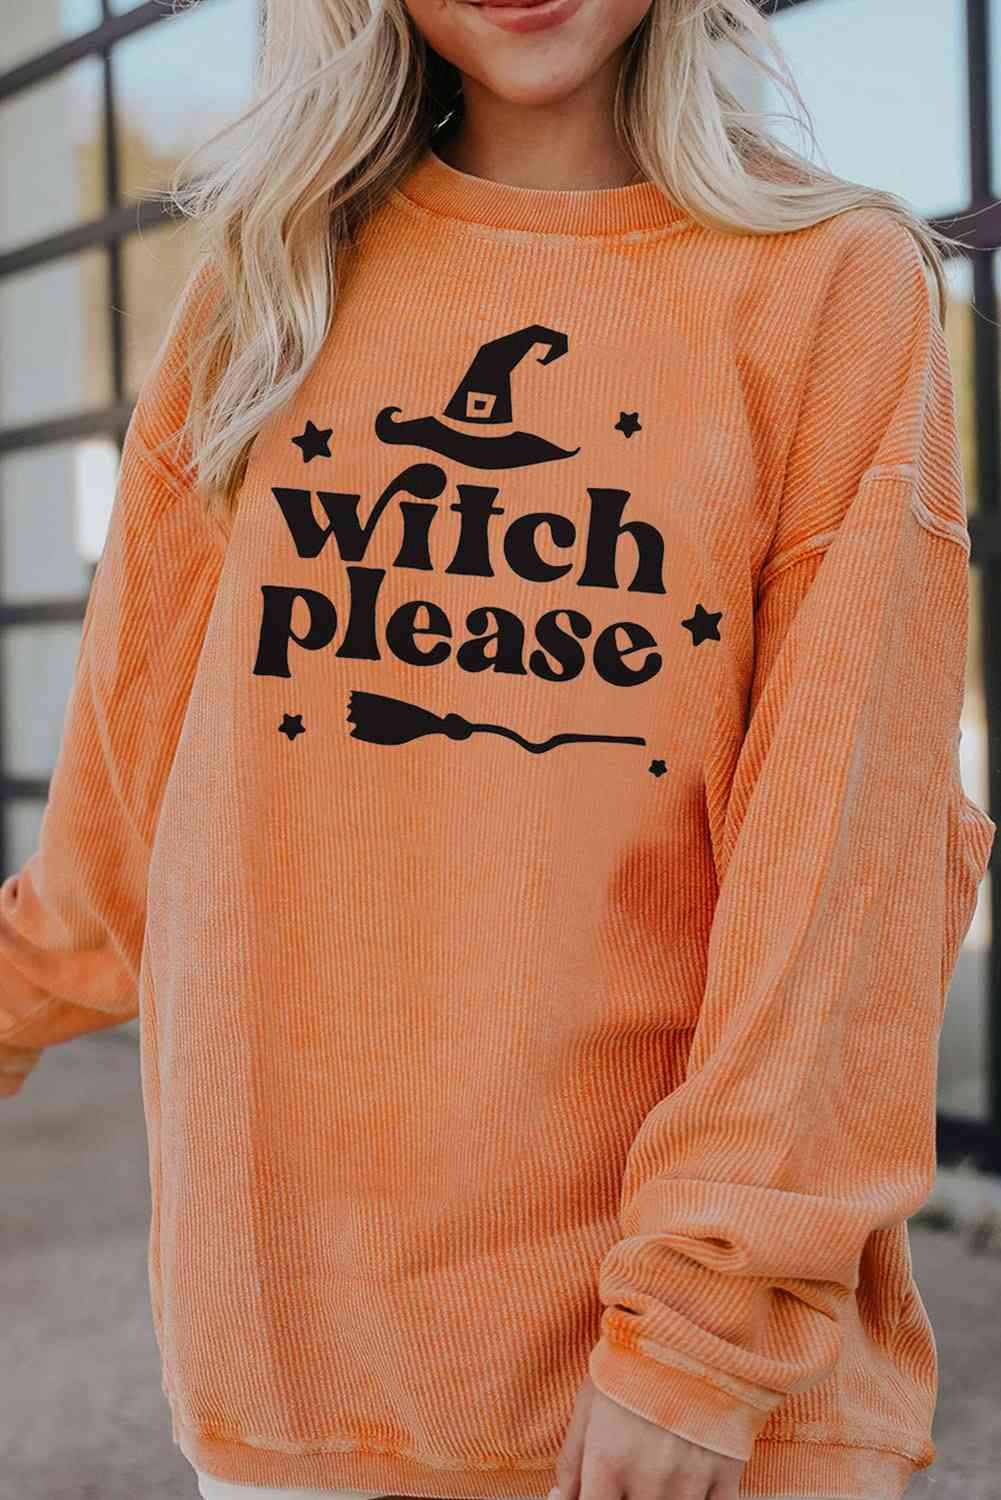 WITCH PLEASE Graphic Dropped Shoulder Sweatshirt - Guy Christopher 